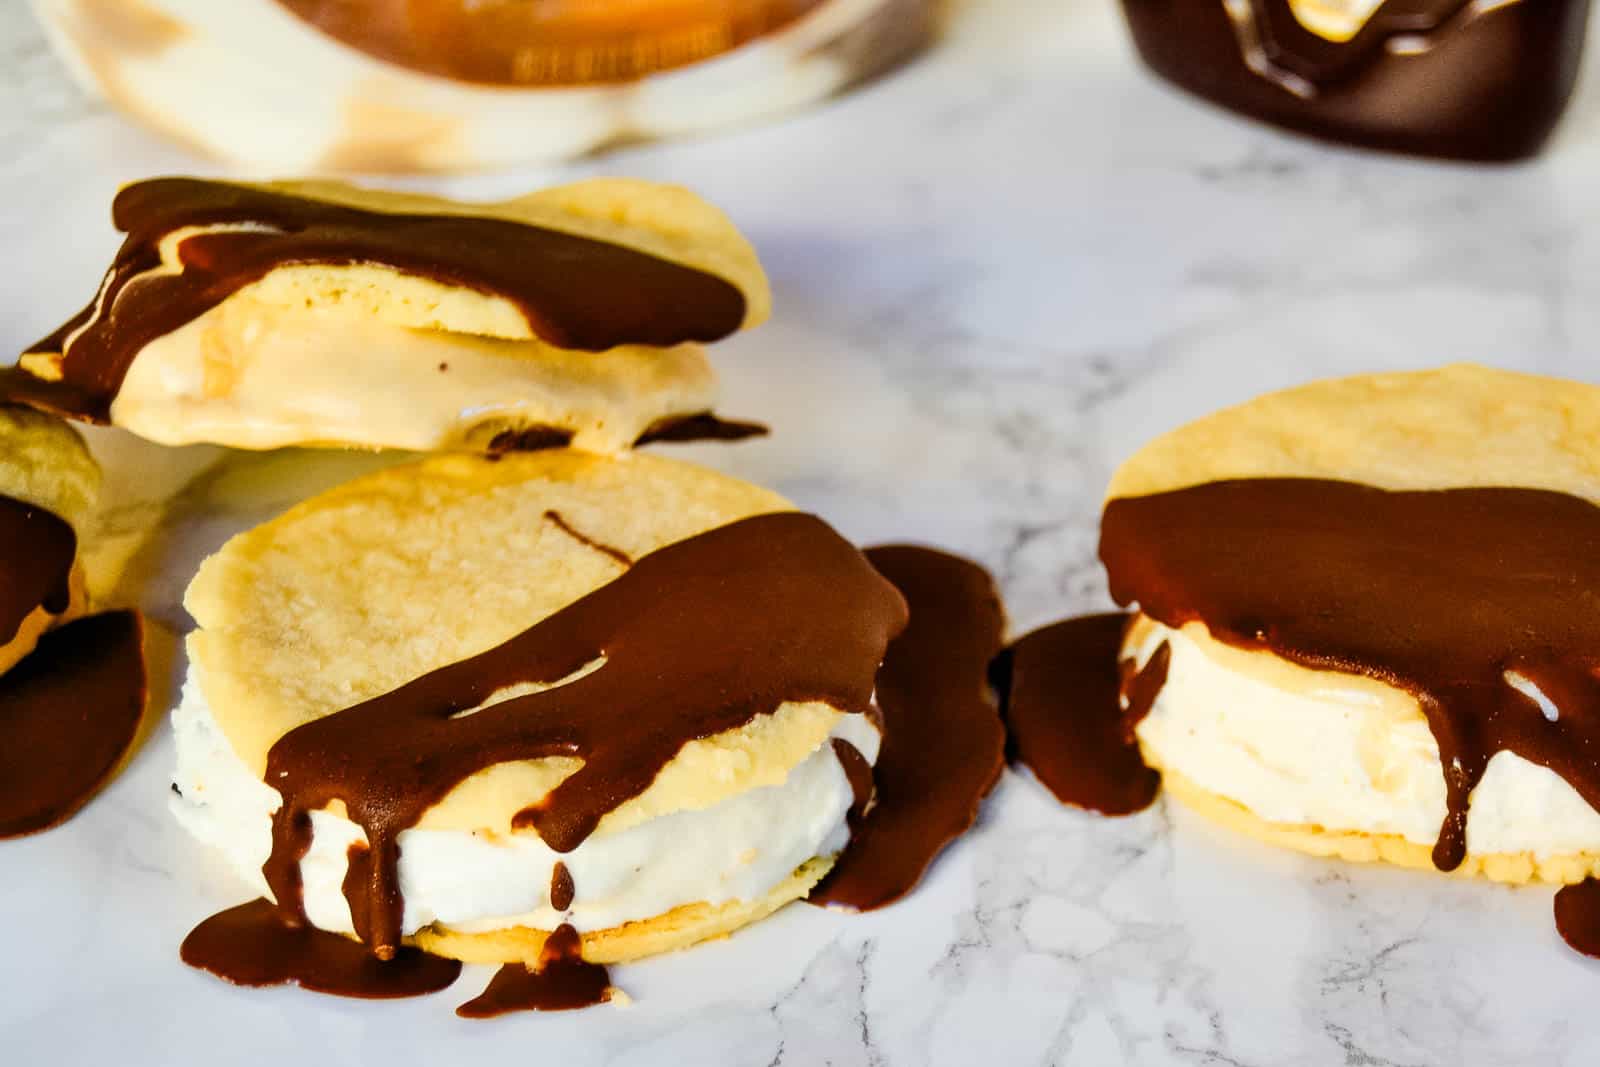 Ice cream sandwiches with chocolate drizzle.